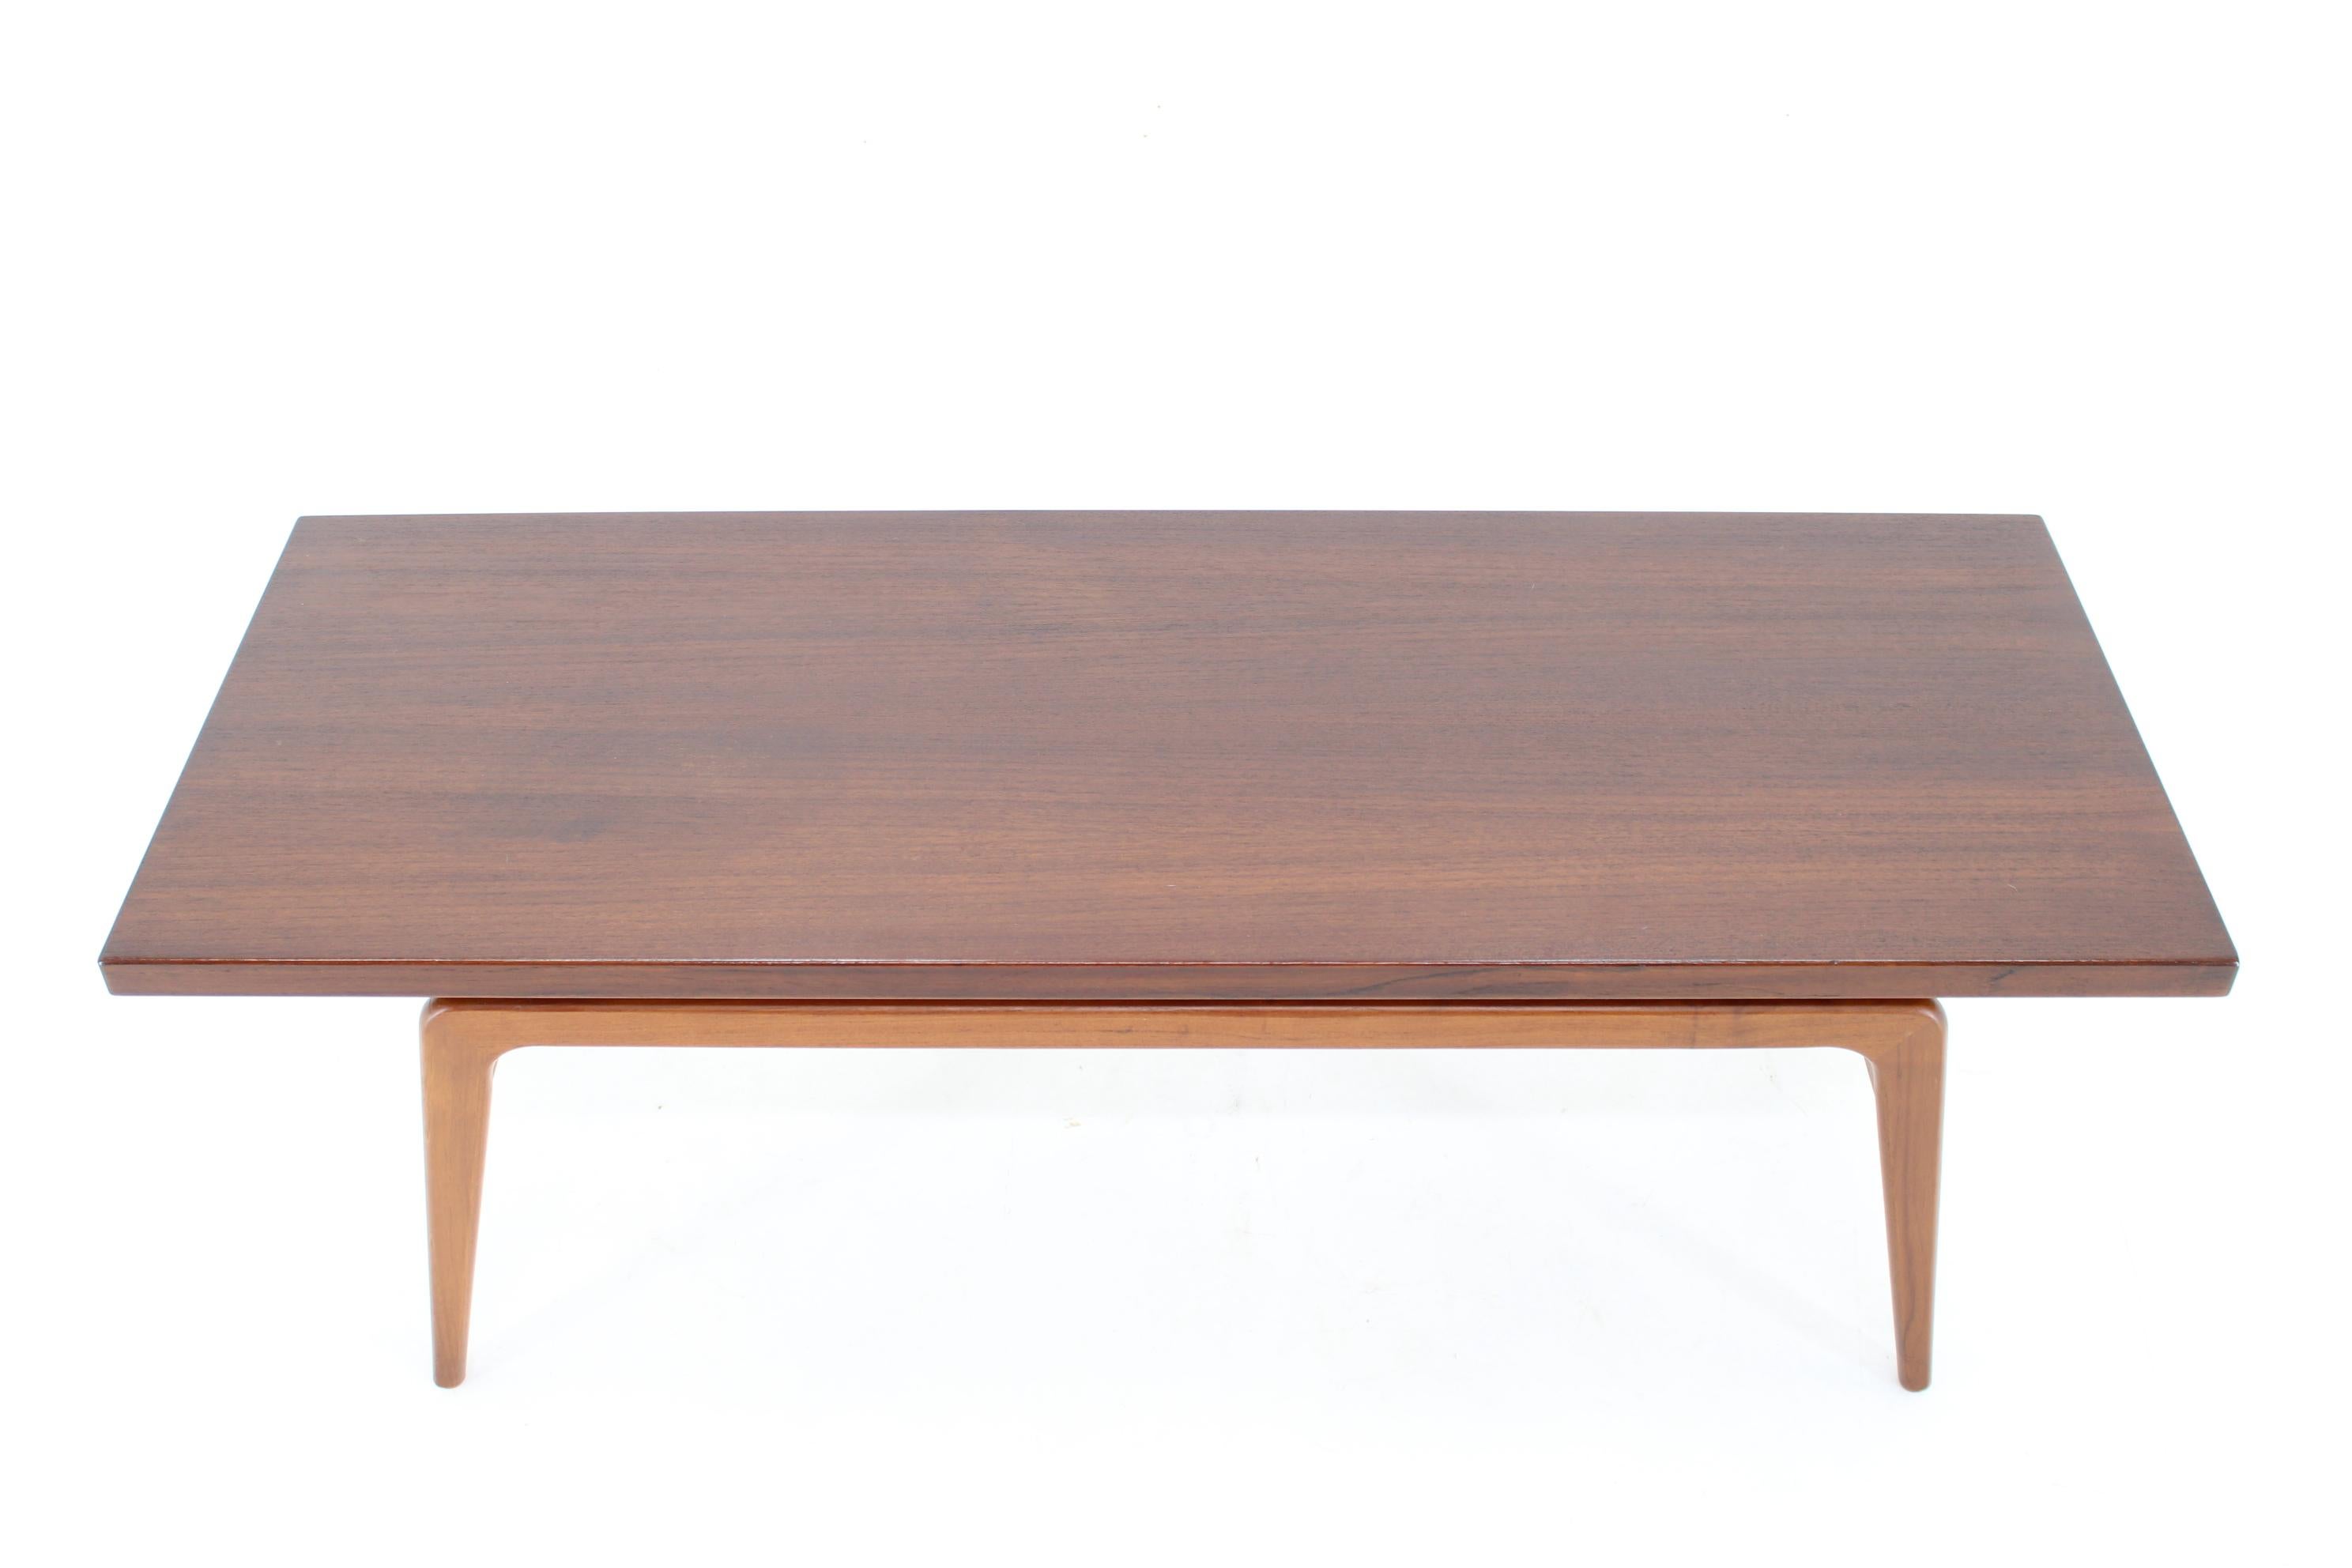 Danish 1960s Teak Coffee Table by Clausen and Son for Silkeborg, Denmark  For Sale